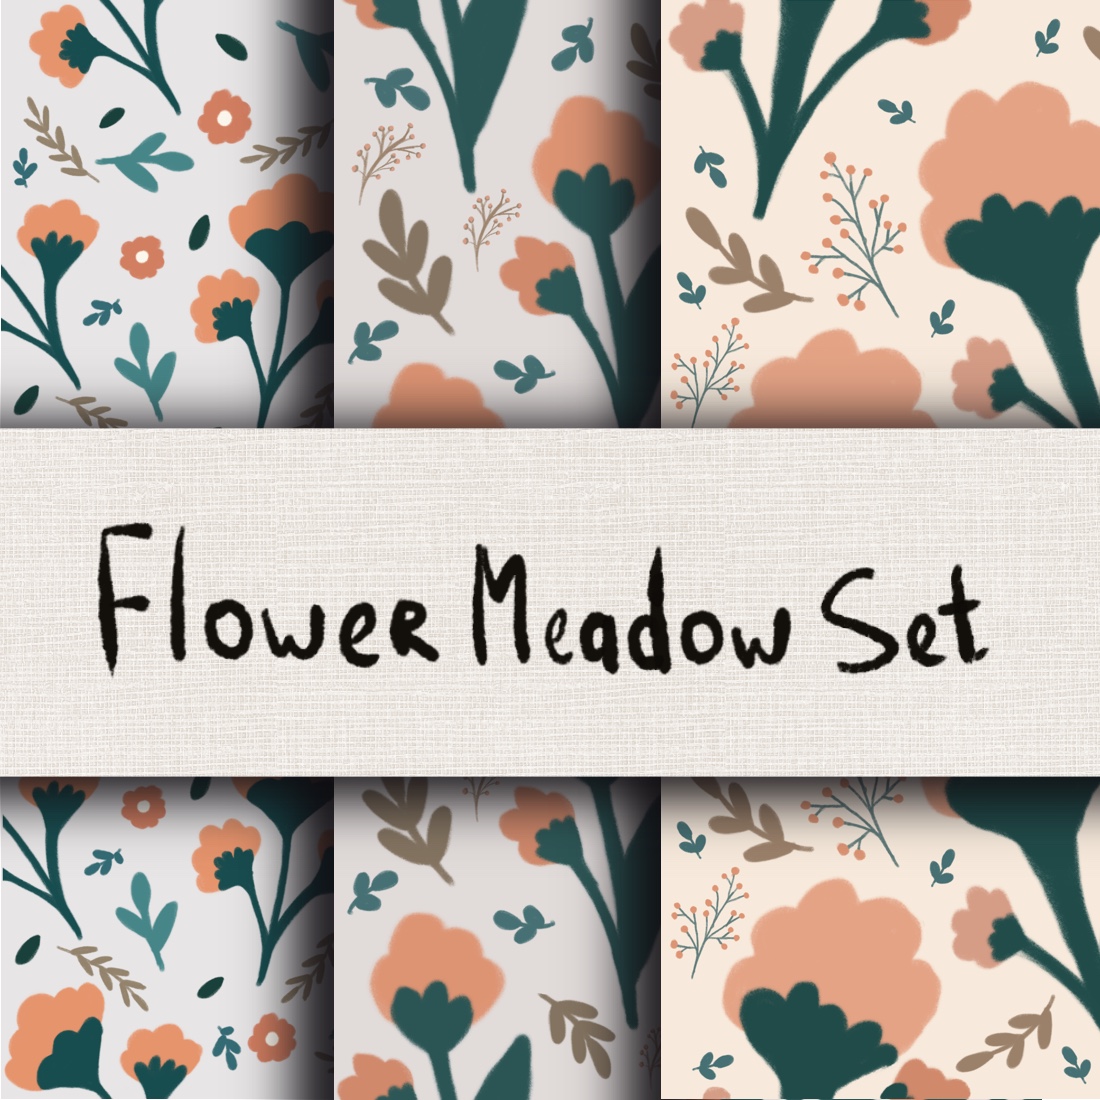 Flower Meadow Set 3 image preview.